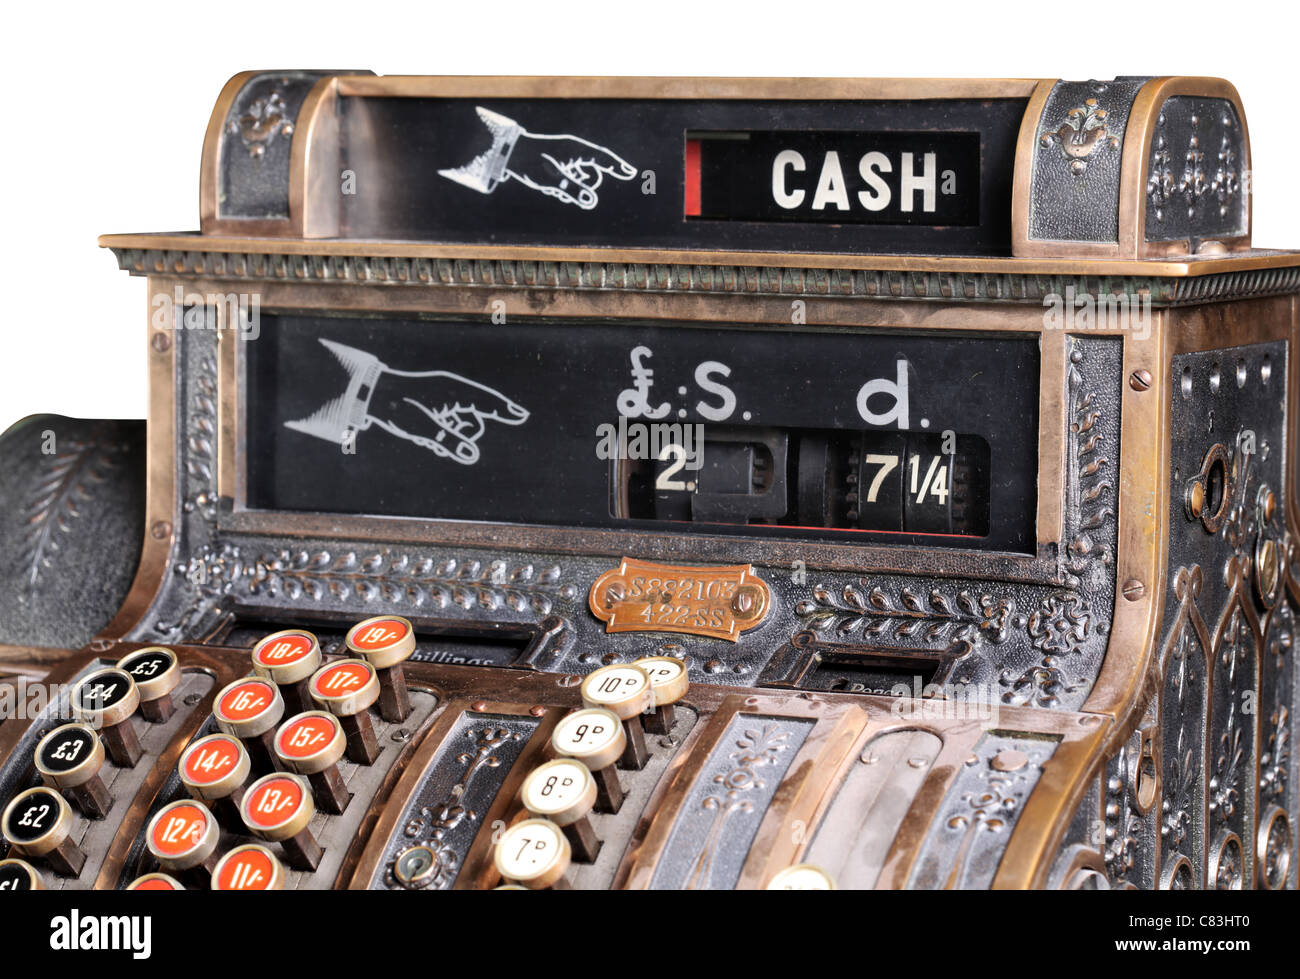 Old-style cash register. Stock Photo